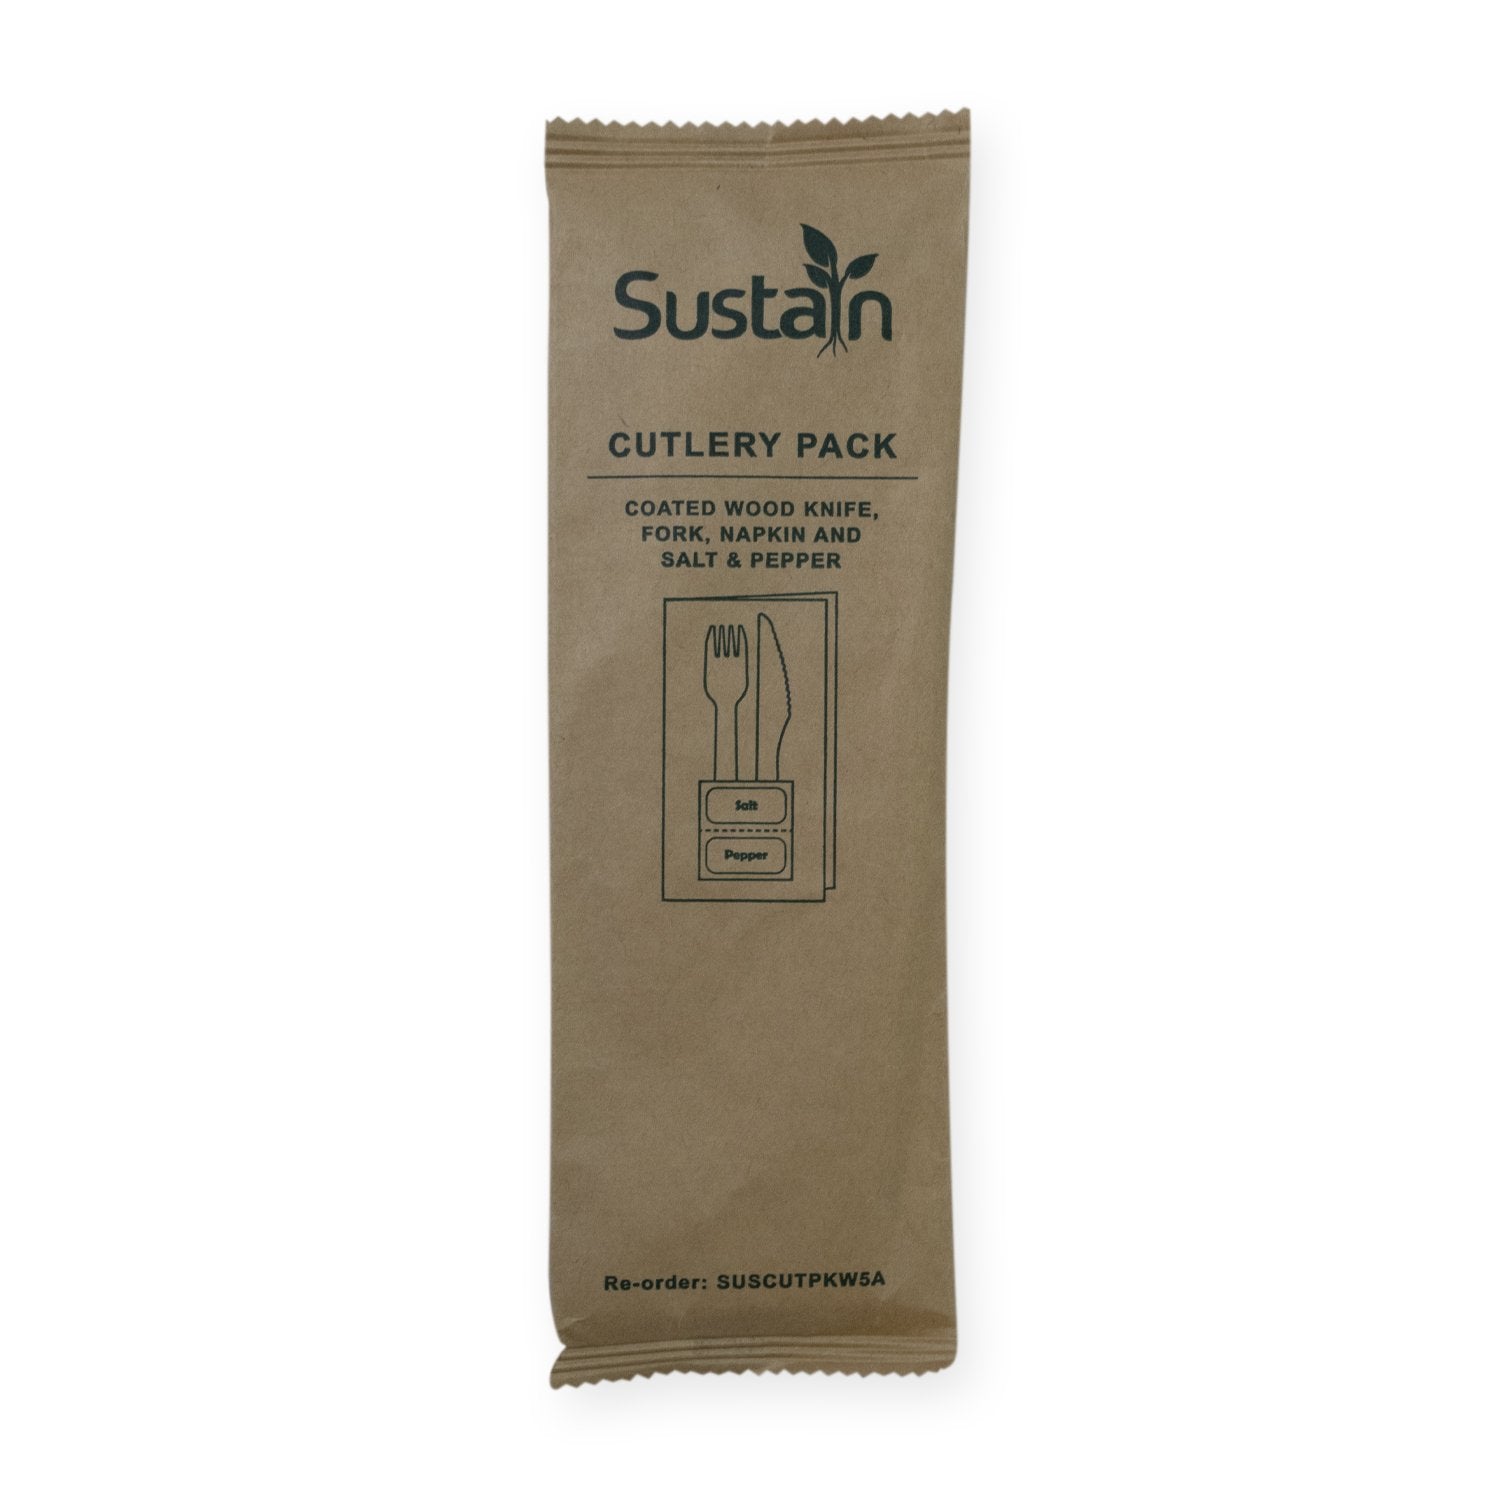 Sustain Sustain Wooden Cutlery Pack with Fork, Knife, Napkin, Salt, Pepper - CT/400 Bags & Takeaway Carton of 400 